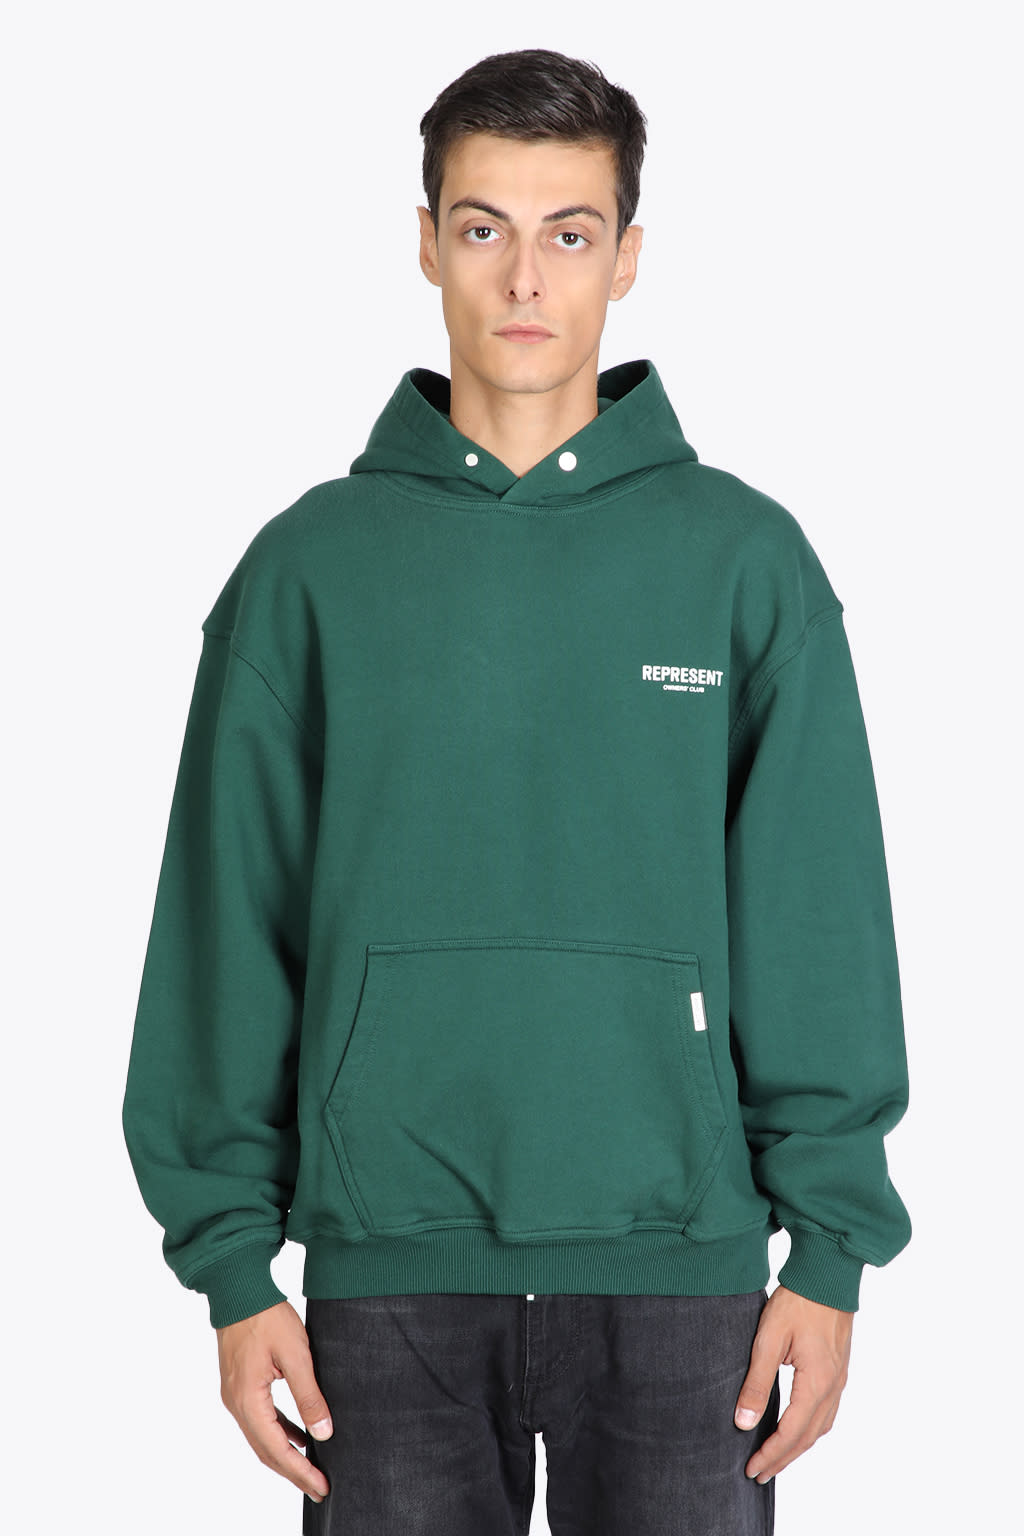 Represent Owners Club Hoodie Green cotton hoodie with logo - Owners club hoodie